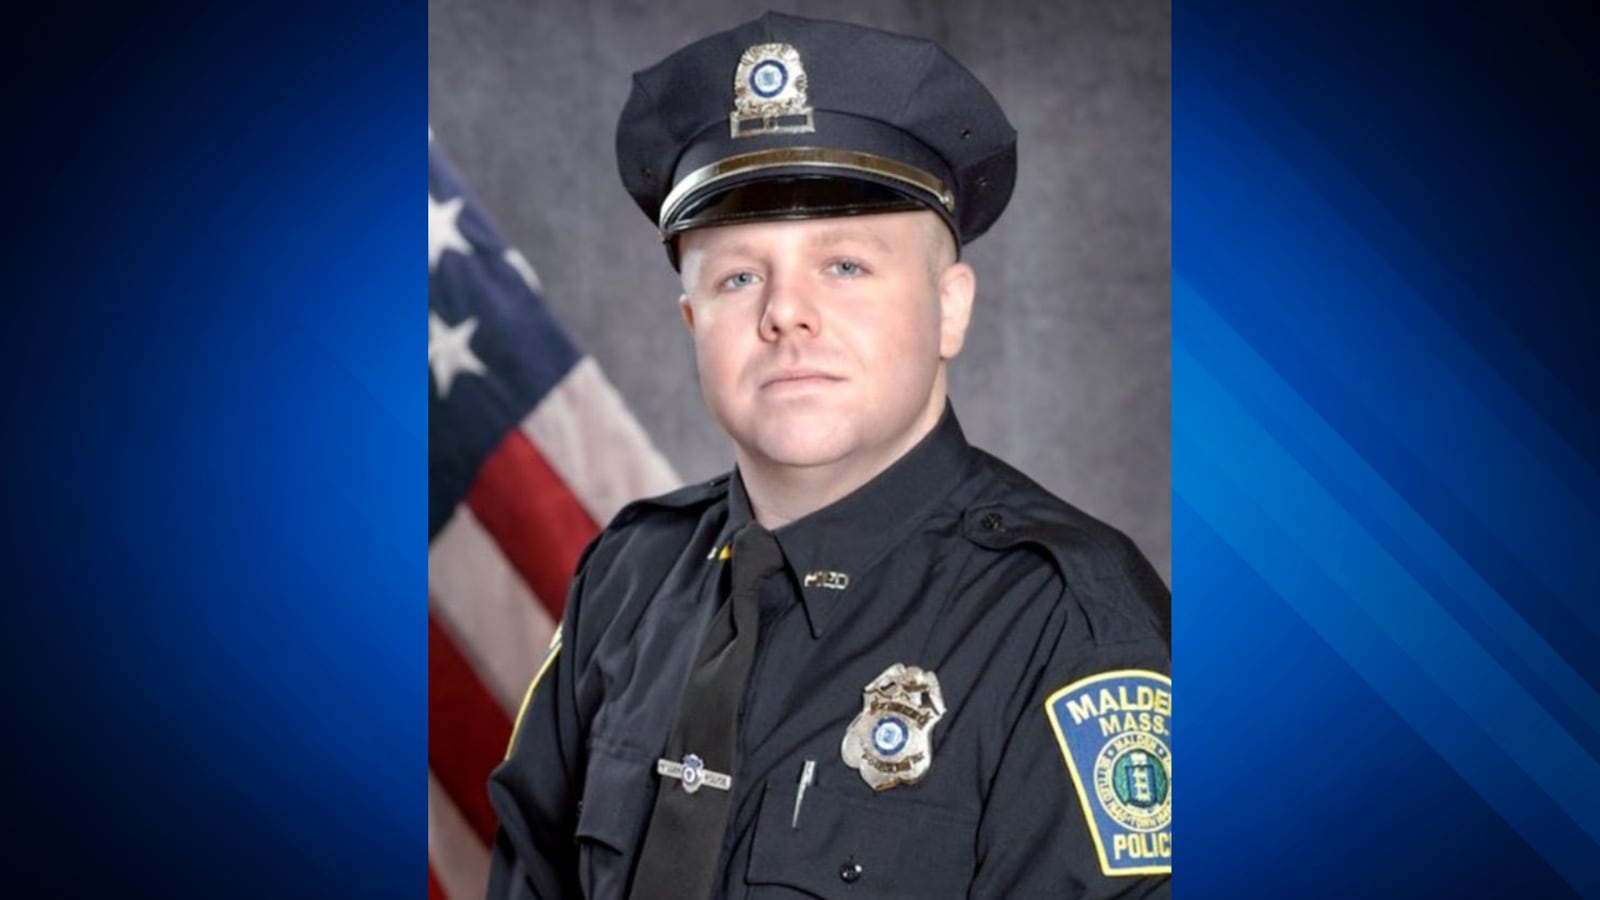 Malden officials mourning unexpected death of police officer Boston